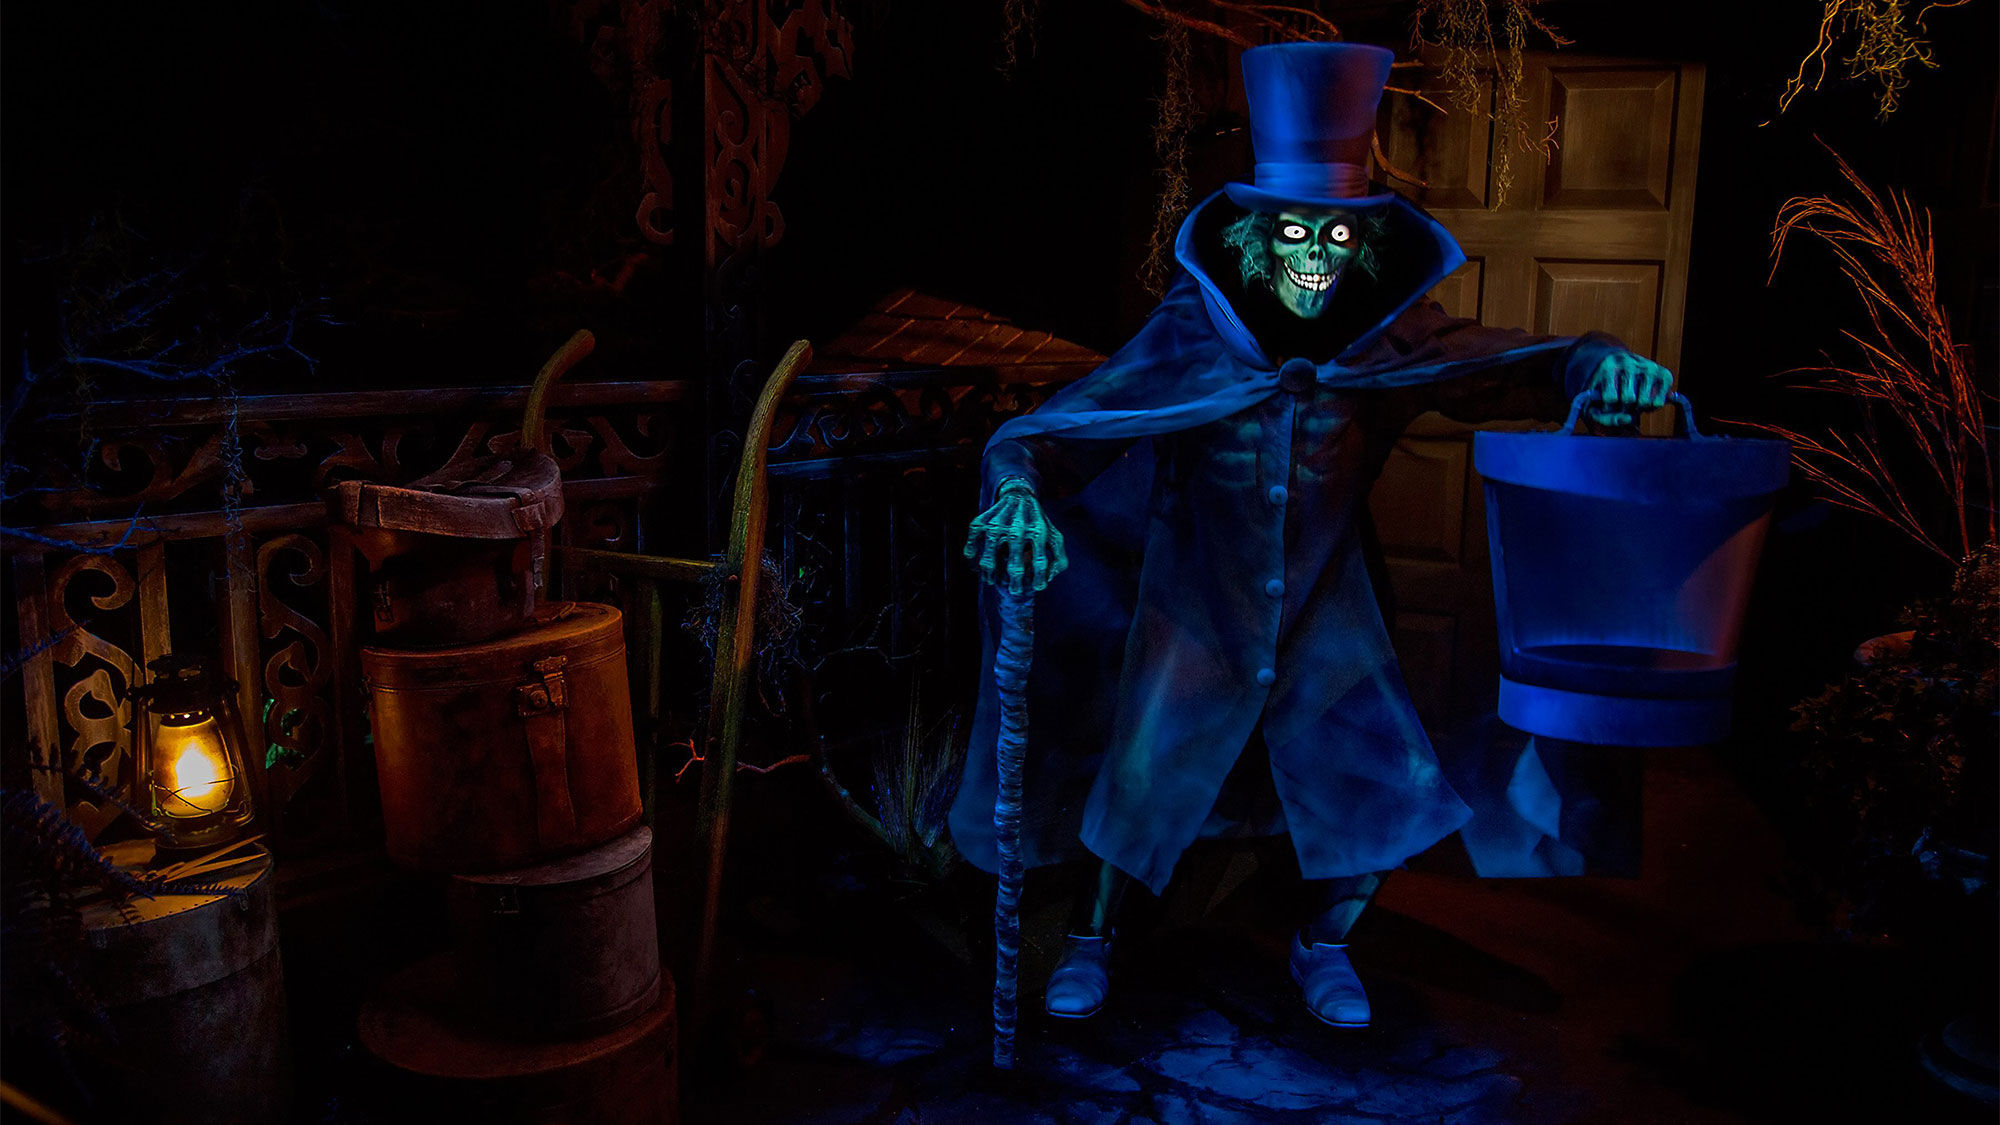 The Hatbox Ghost is coming to the Magic Kingdom’s version of the Haunted Mansion next year.